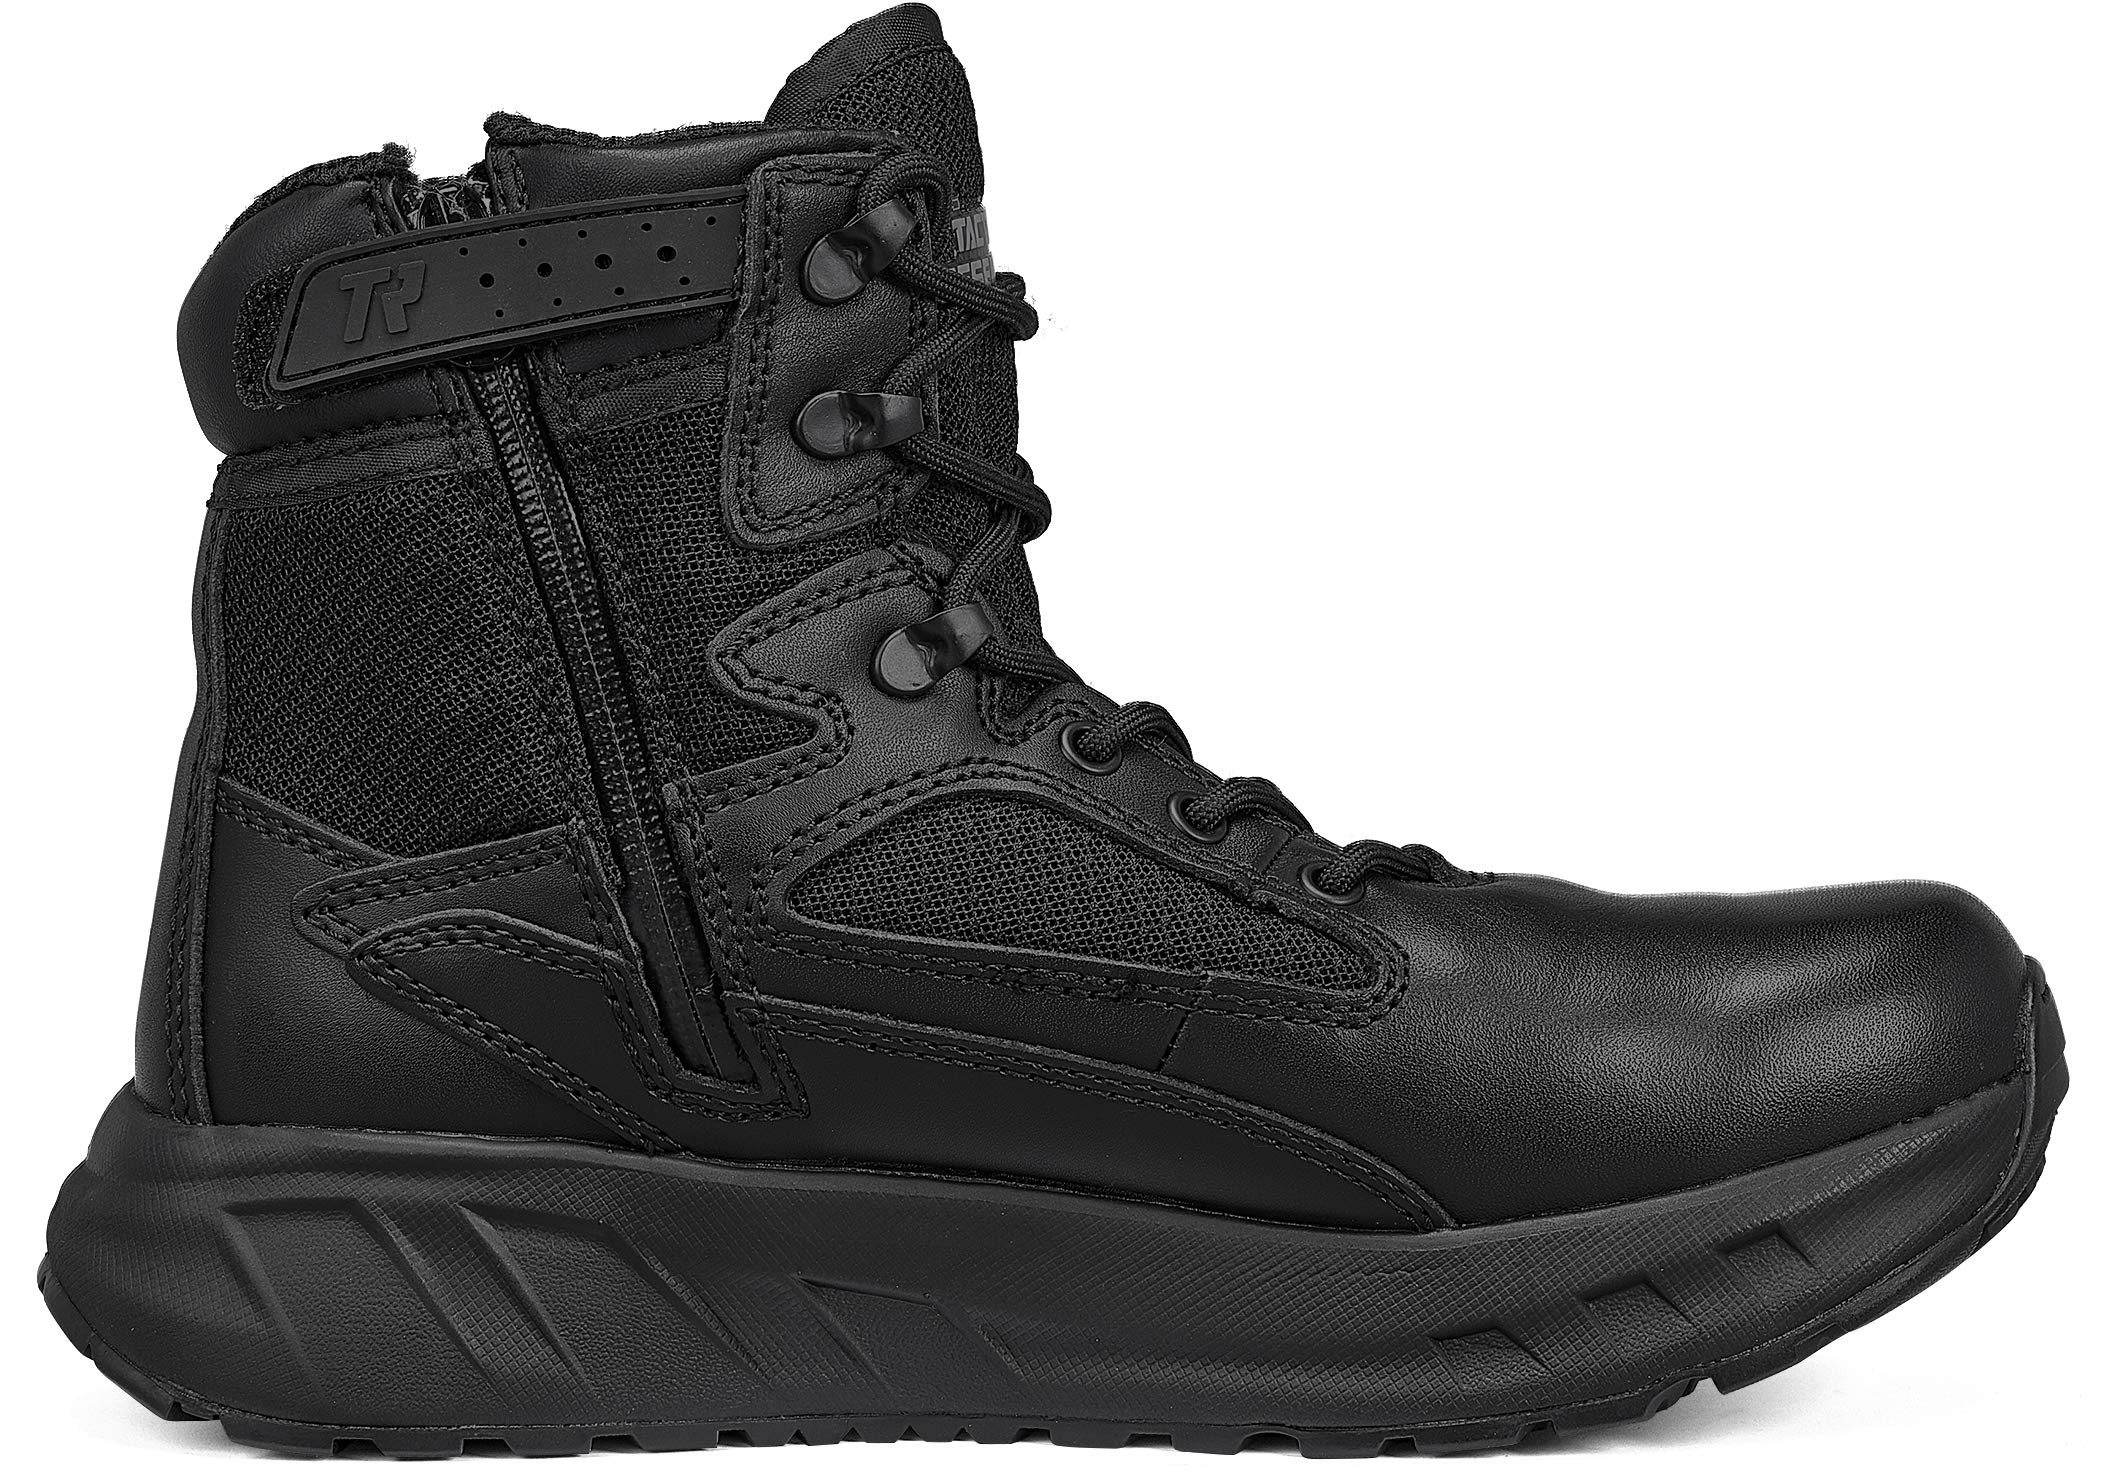 Tactical Research MAXX 6Z 6 Inch Ultra-Cushioned Maximalist Black Tactical Boots for Men with Zipper - Designed for Police, EMS, and Security with Slip-Resistant Vibram Outsole